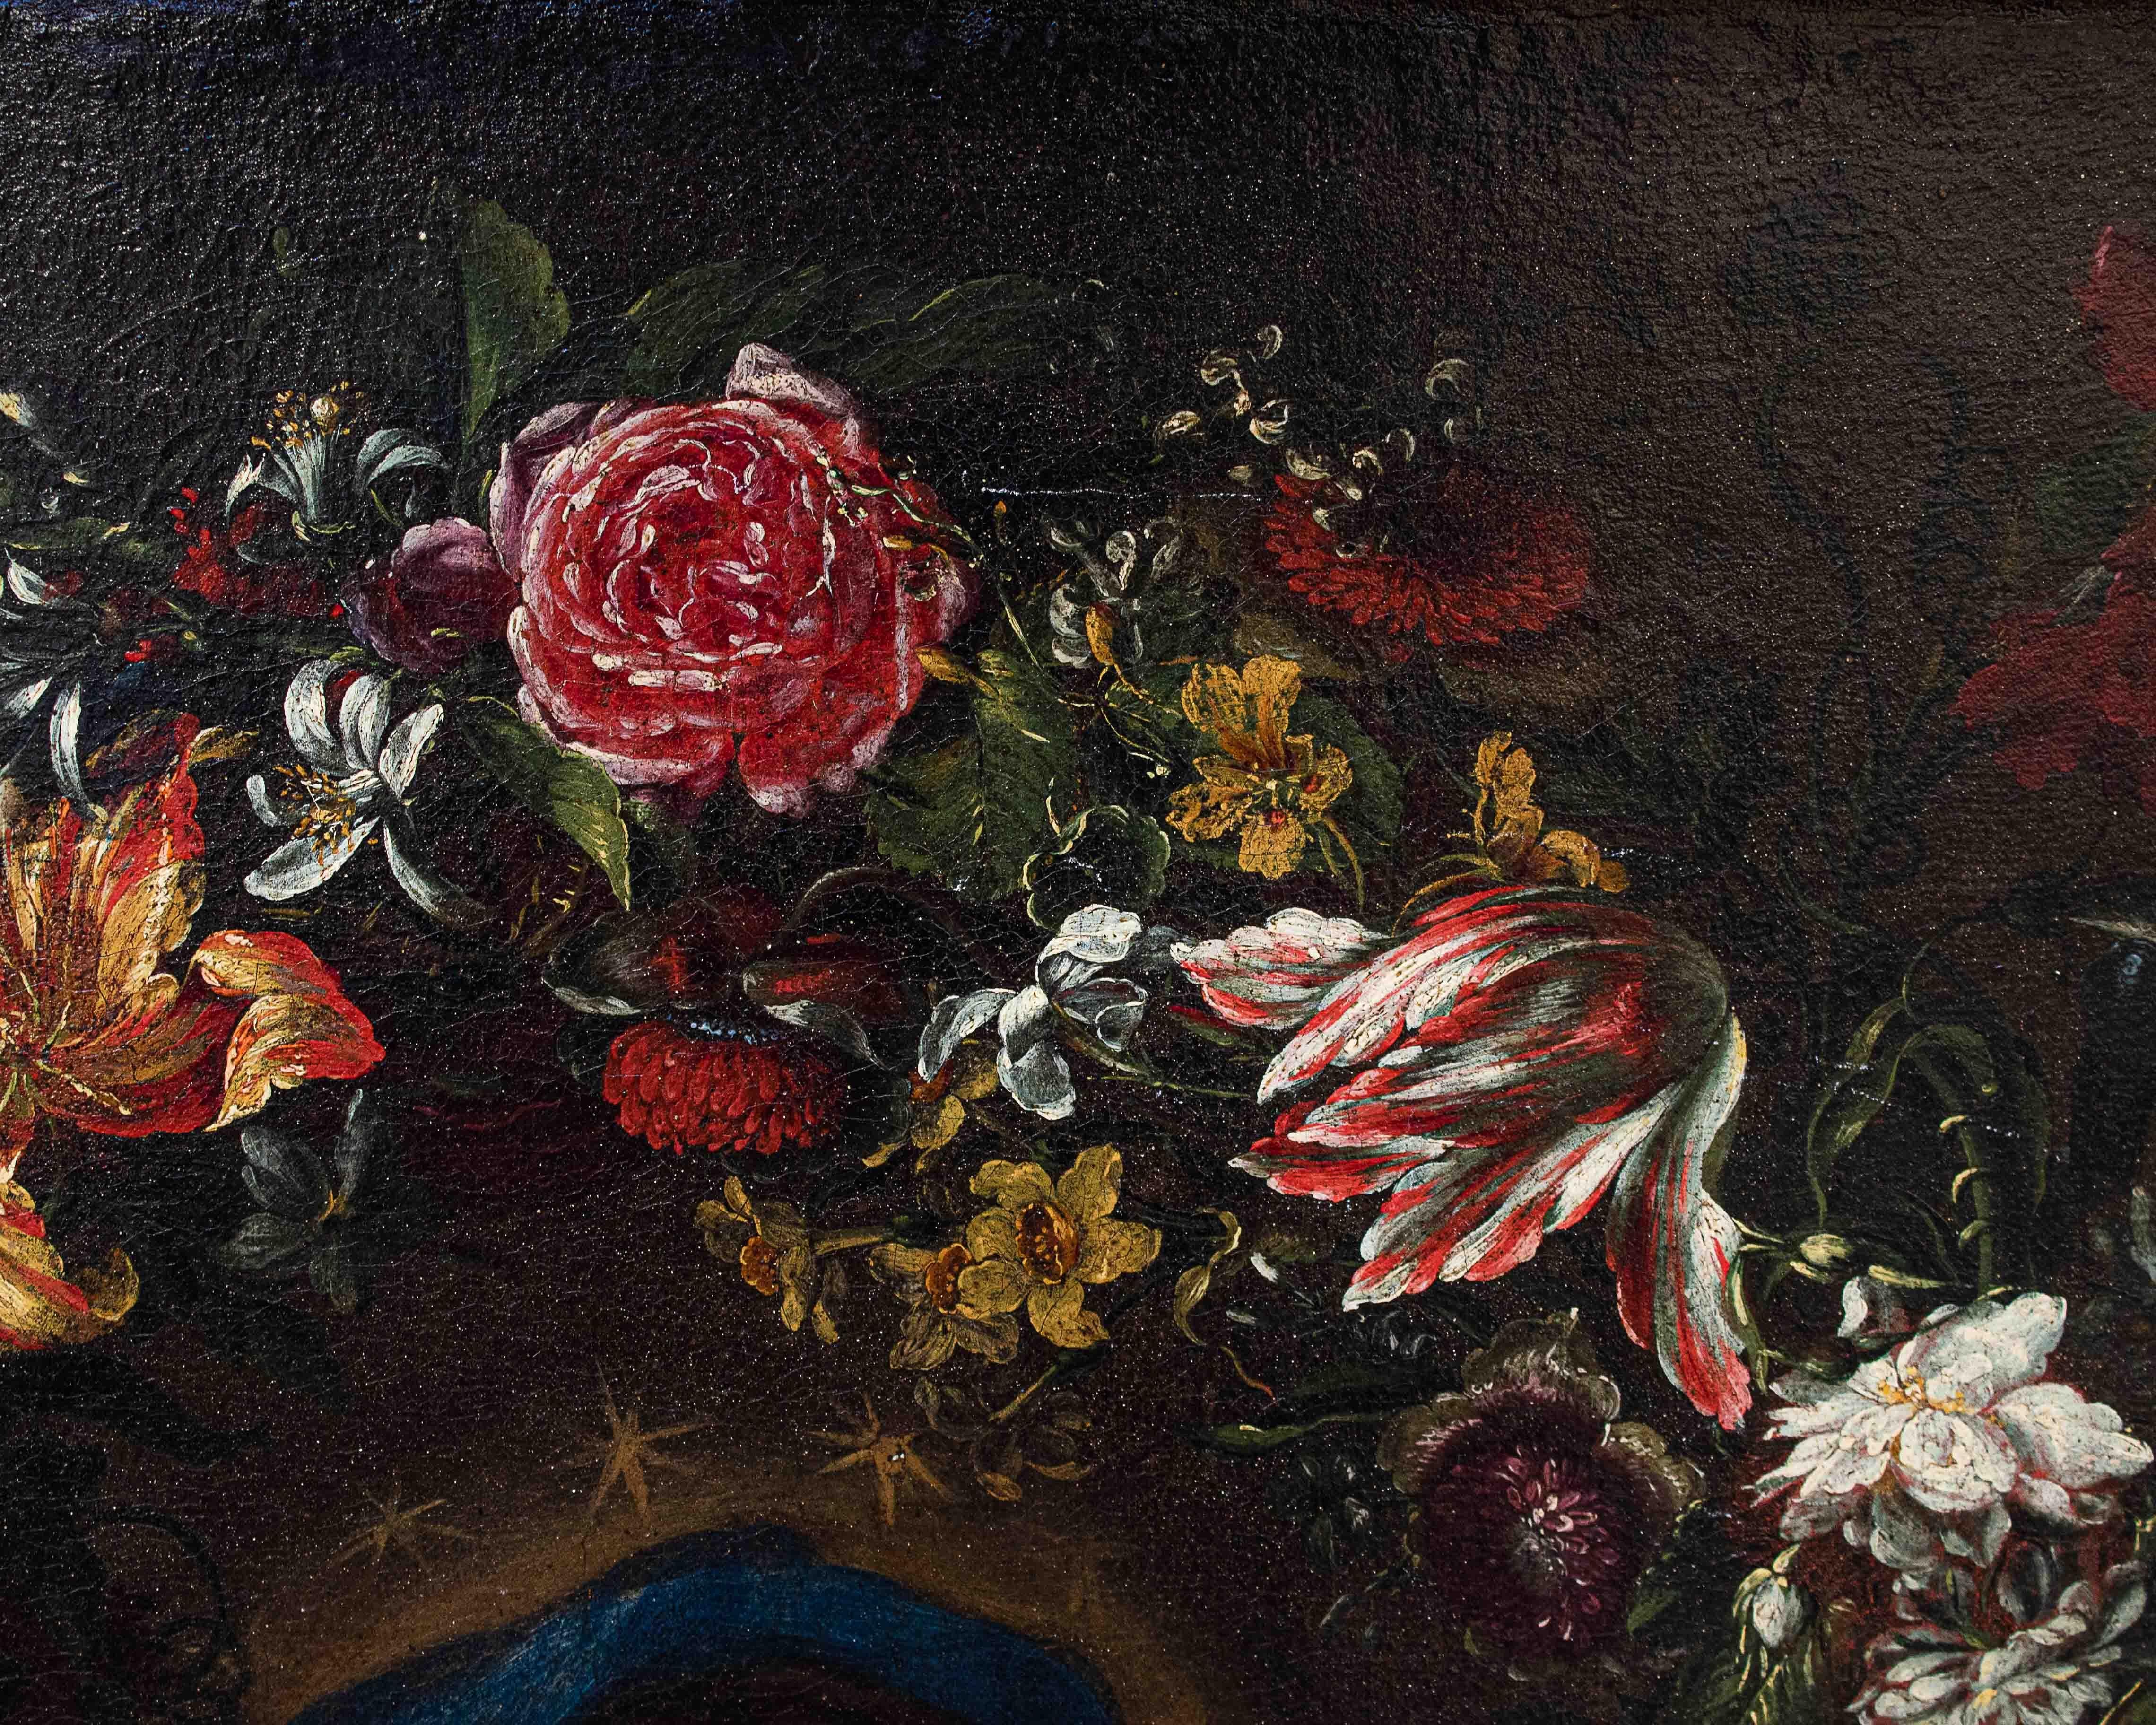 17th-18th Century Virgin with in Garland of Flowers Painting Oil on Canvas 3